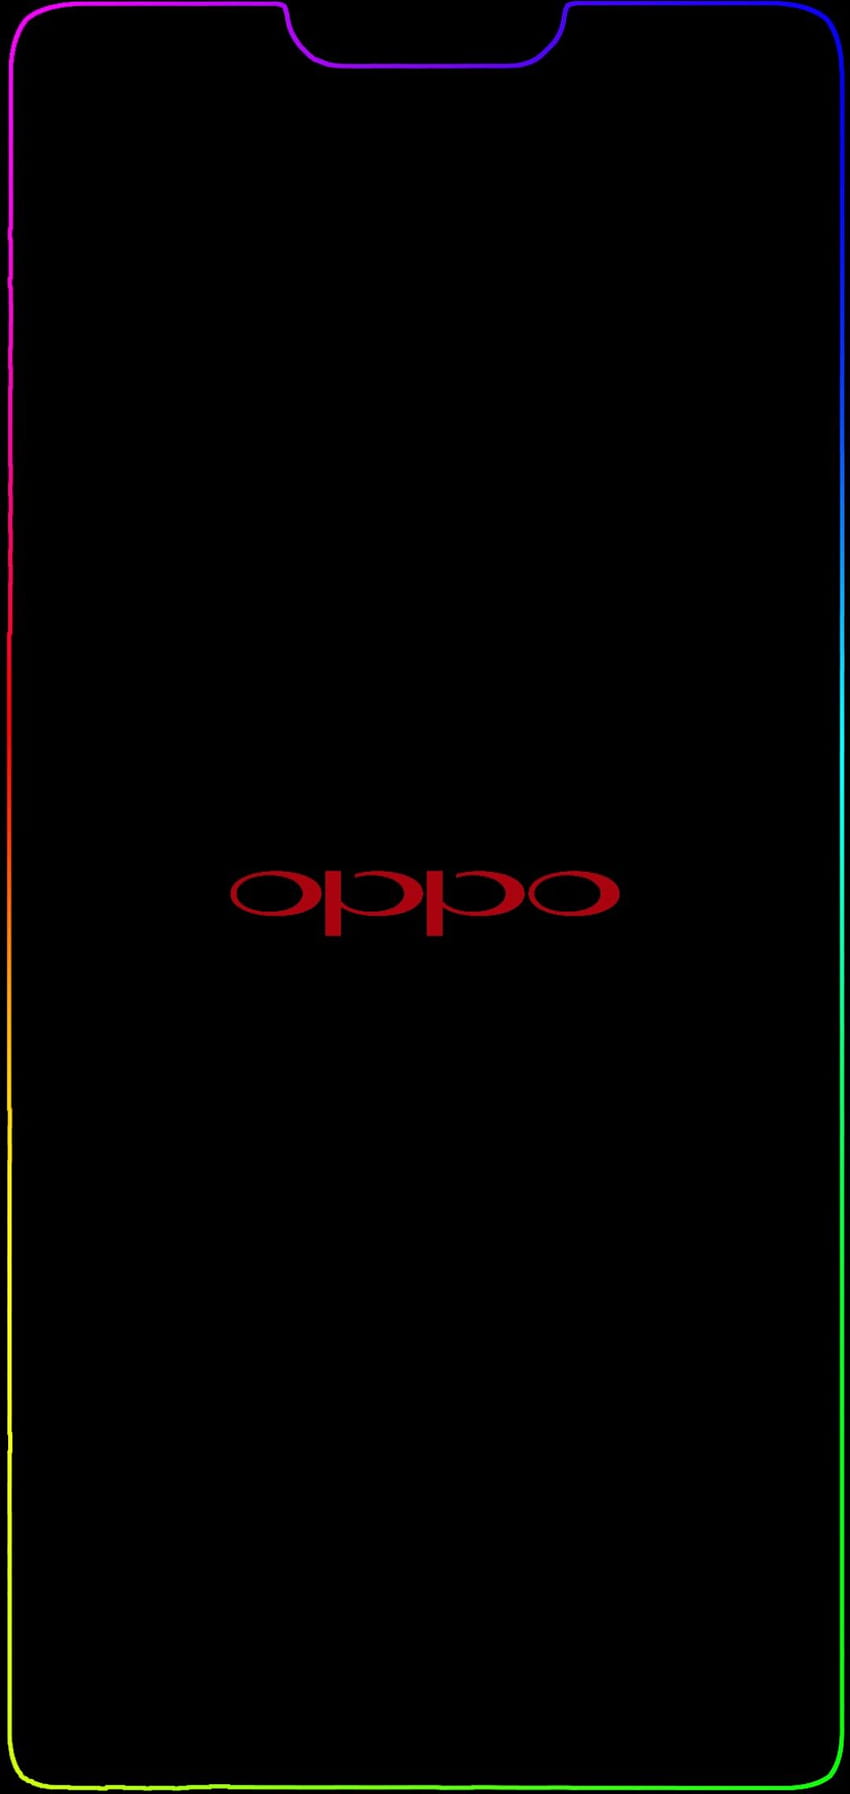 Tải xuống APK Wallpapers for Oppo F7  F9  F7 Plus  F9 Plus cho Android